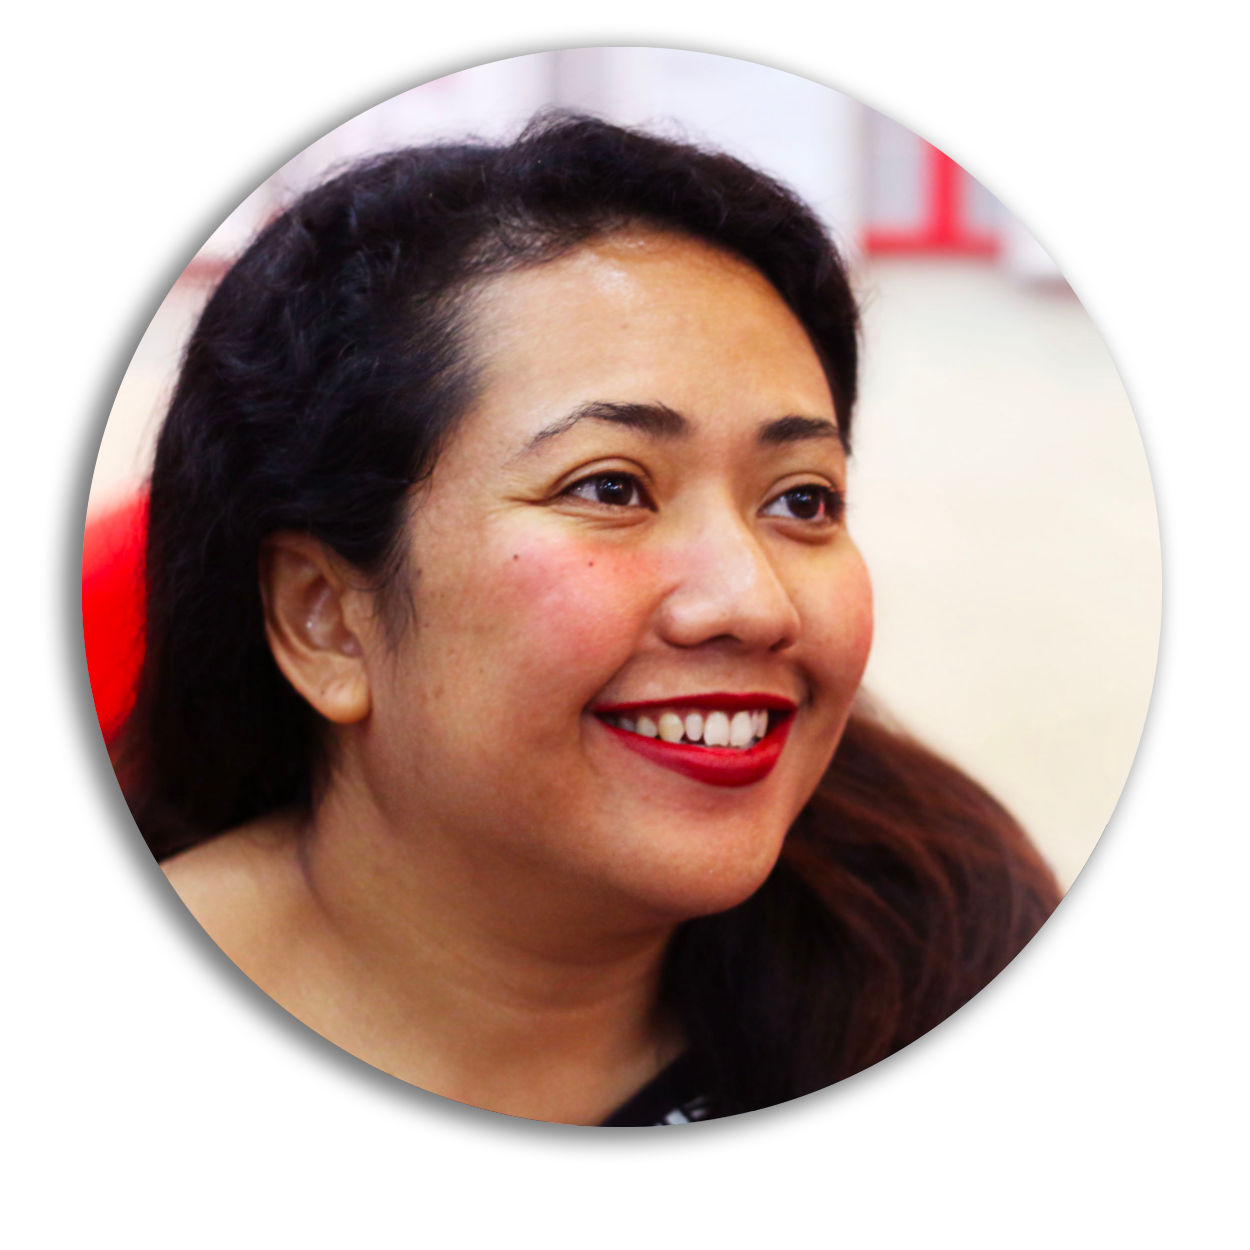 Hamidah - Master of Science in Occupational Safety, Health and Wellbeing - Master Degree student at DIMENSIONS Singapore